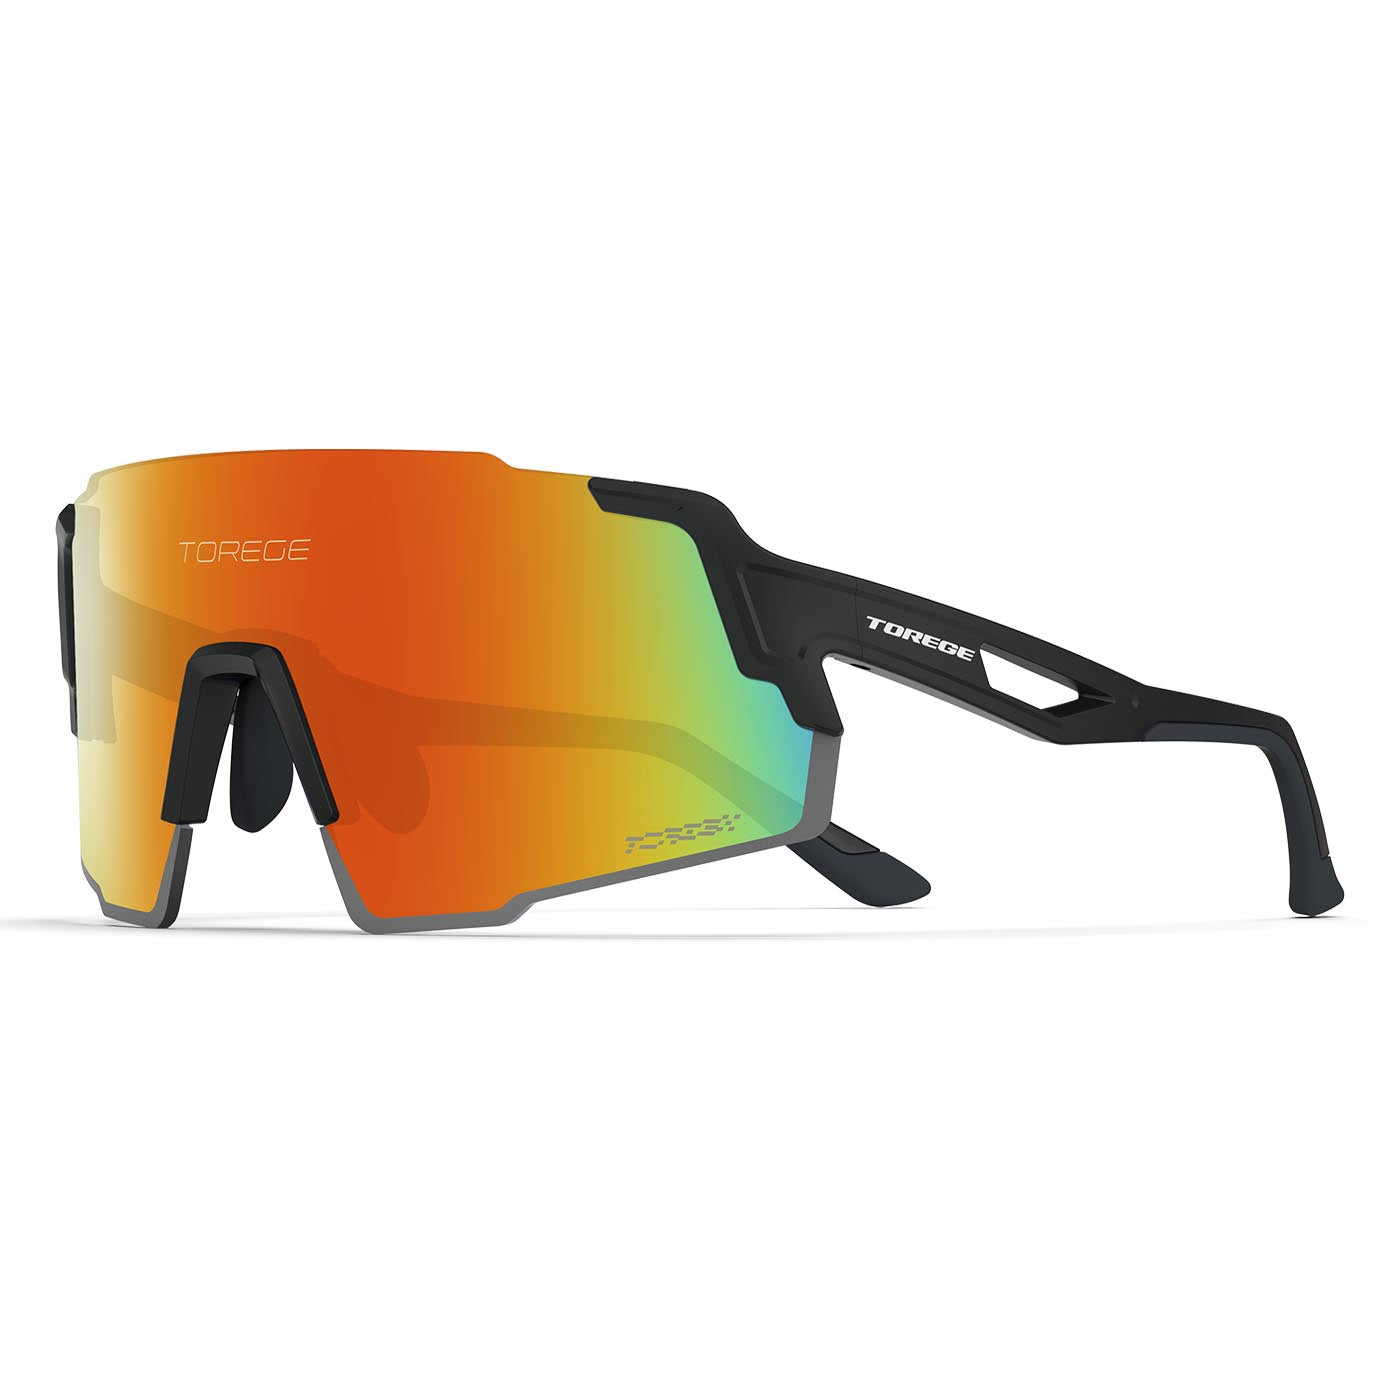 Reef Ice Ultra Lightweight Sports Sunglasses for Men & Women With